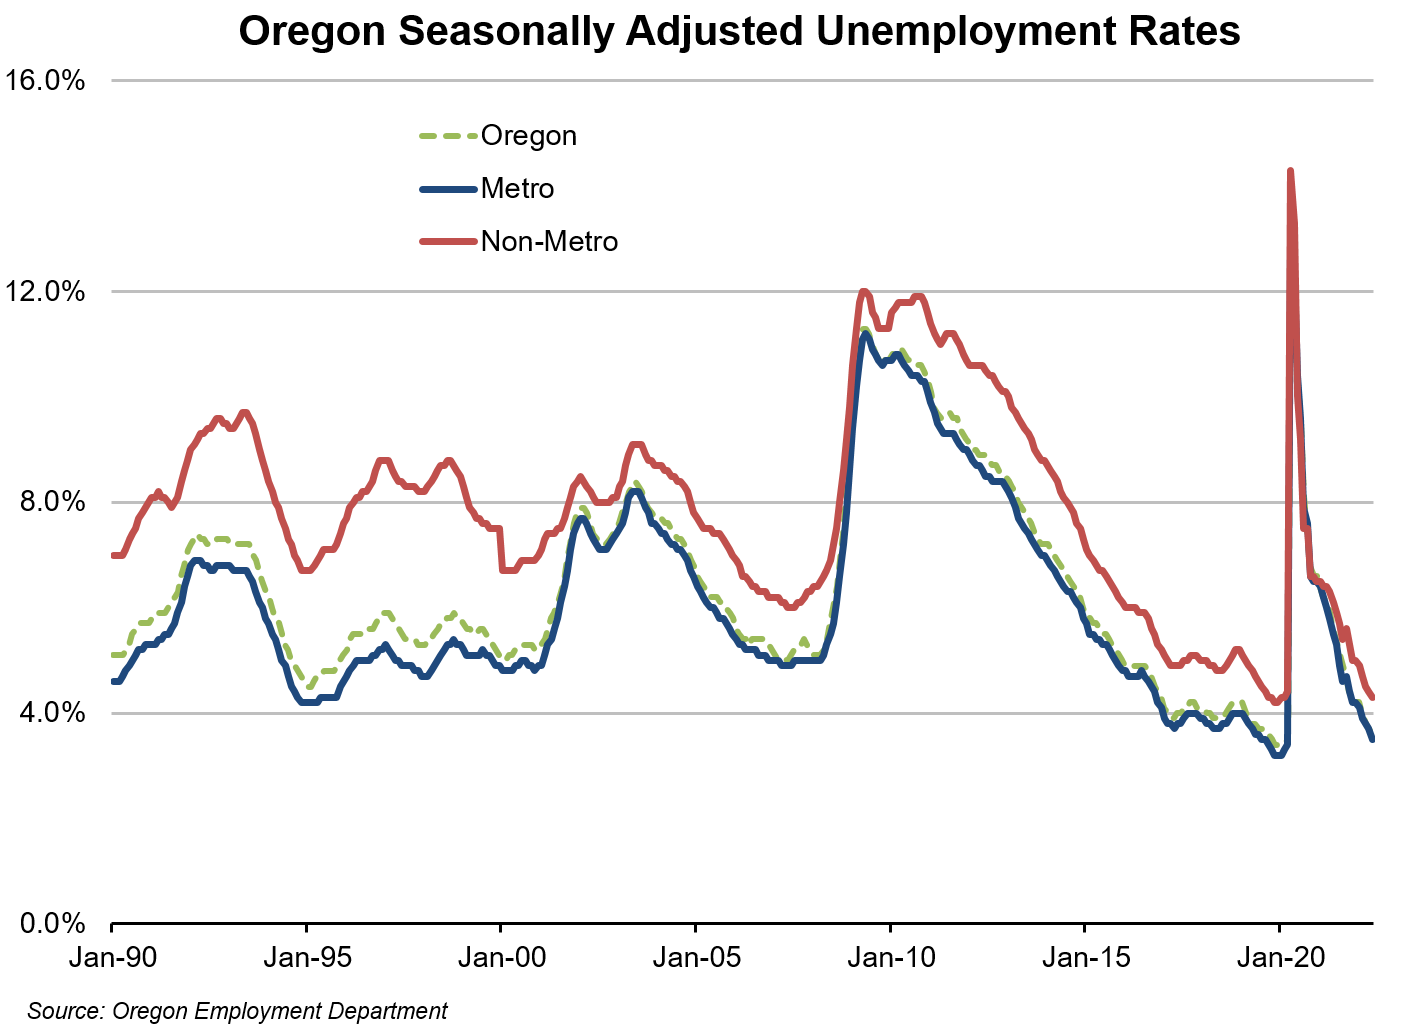 Graph showing Oregon seasonally adjusted unemployment rates